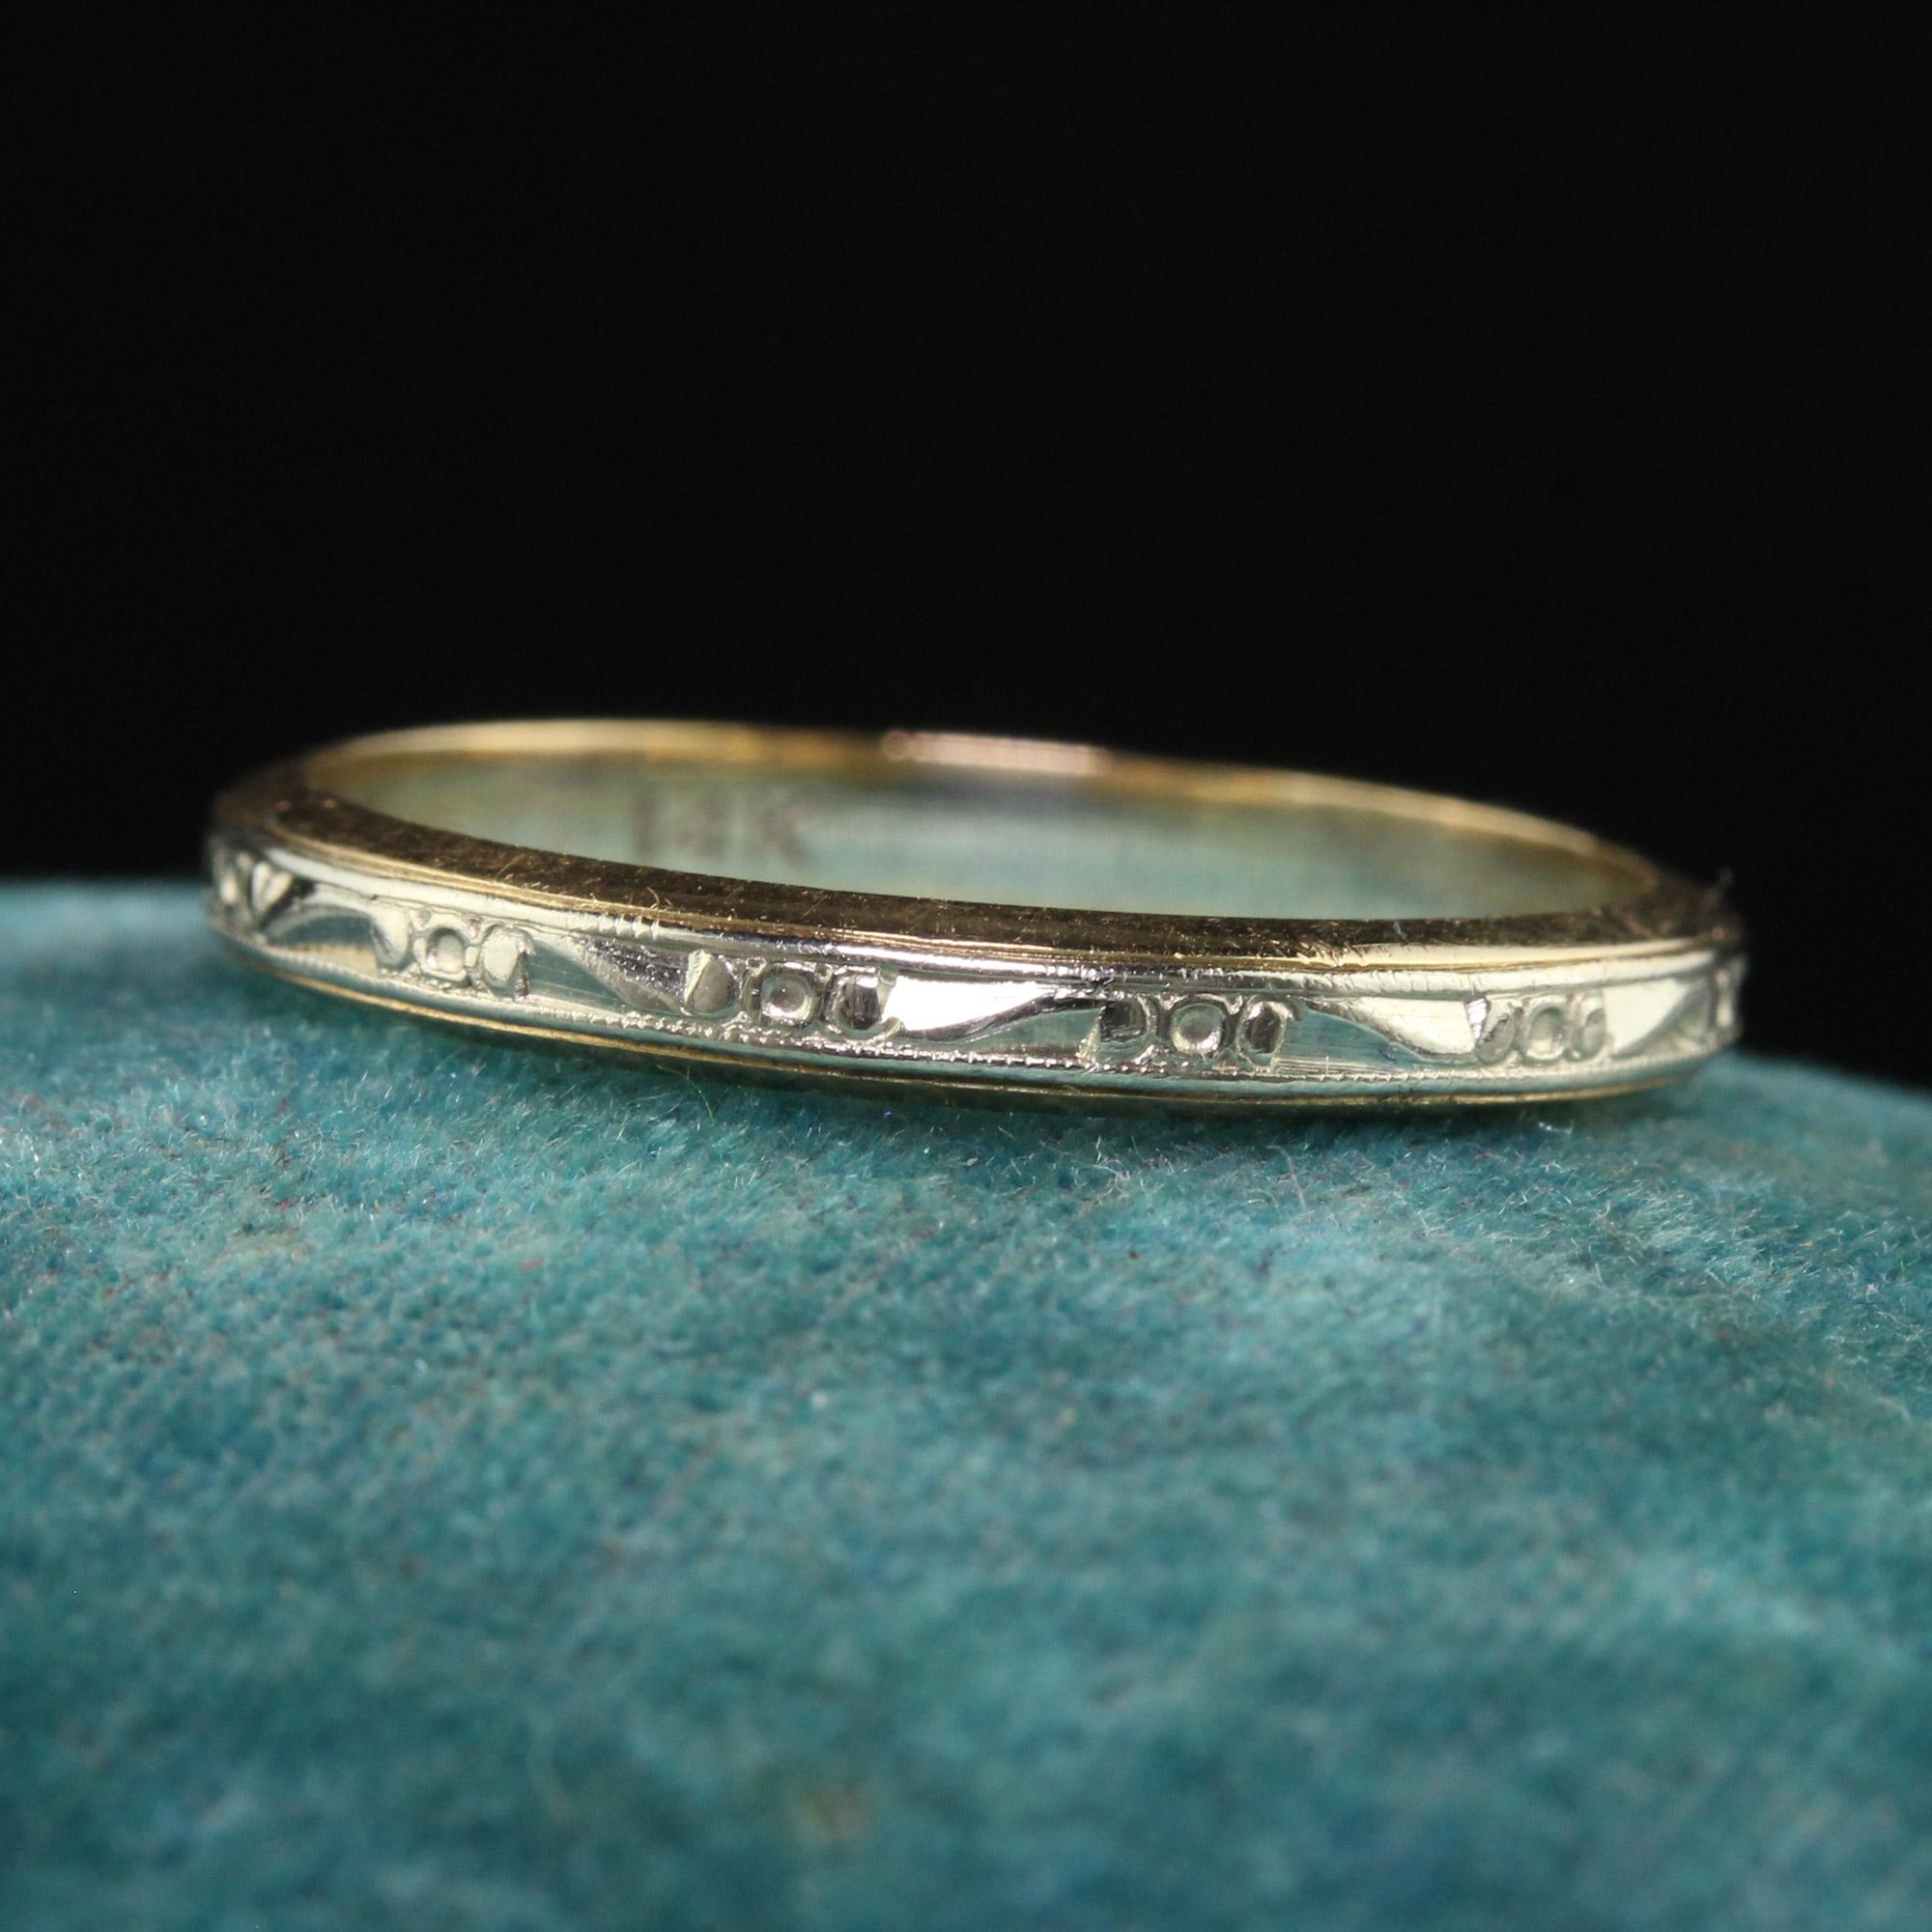 Beautiful Antique Art Deco 14K Two Tone Engraved Wedding Band - Size 6 1/2. This beautiful wedding band is crafted in 14k yellow and white gold. The ring is engraved around the entire ring and sits low on the finger. The ring is in good condition